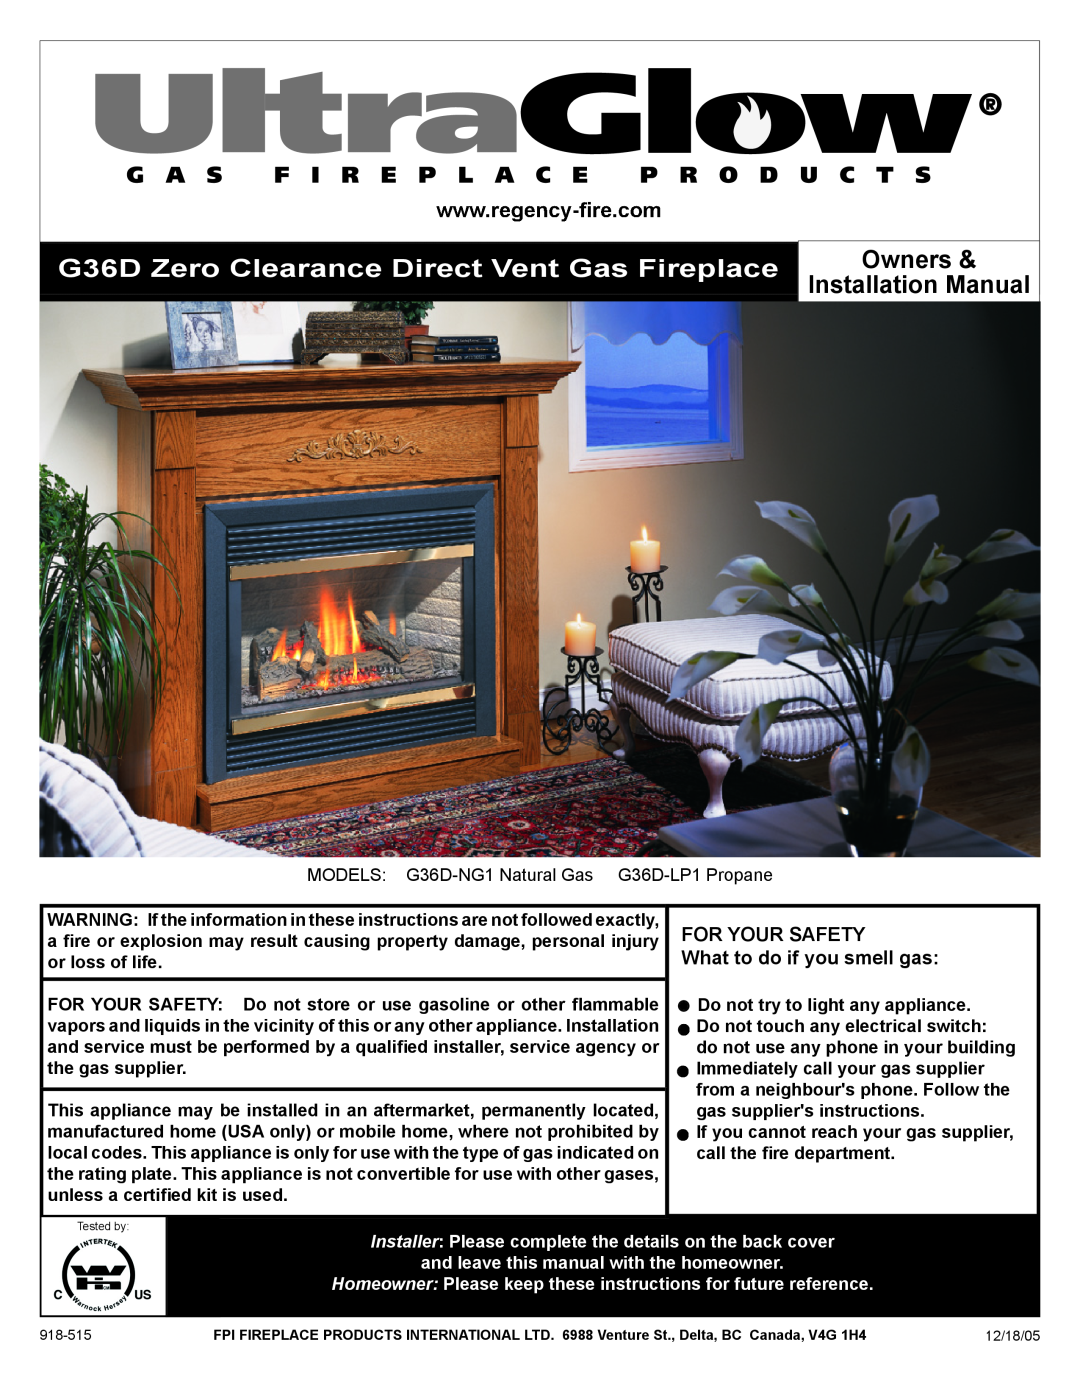 Regency installation manual G36D Zero Clearance Direct Vent Gas Fireplace, Owners, Installation Manual 